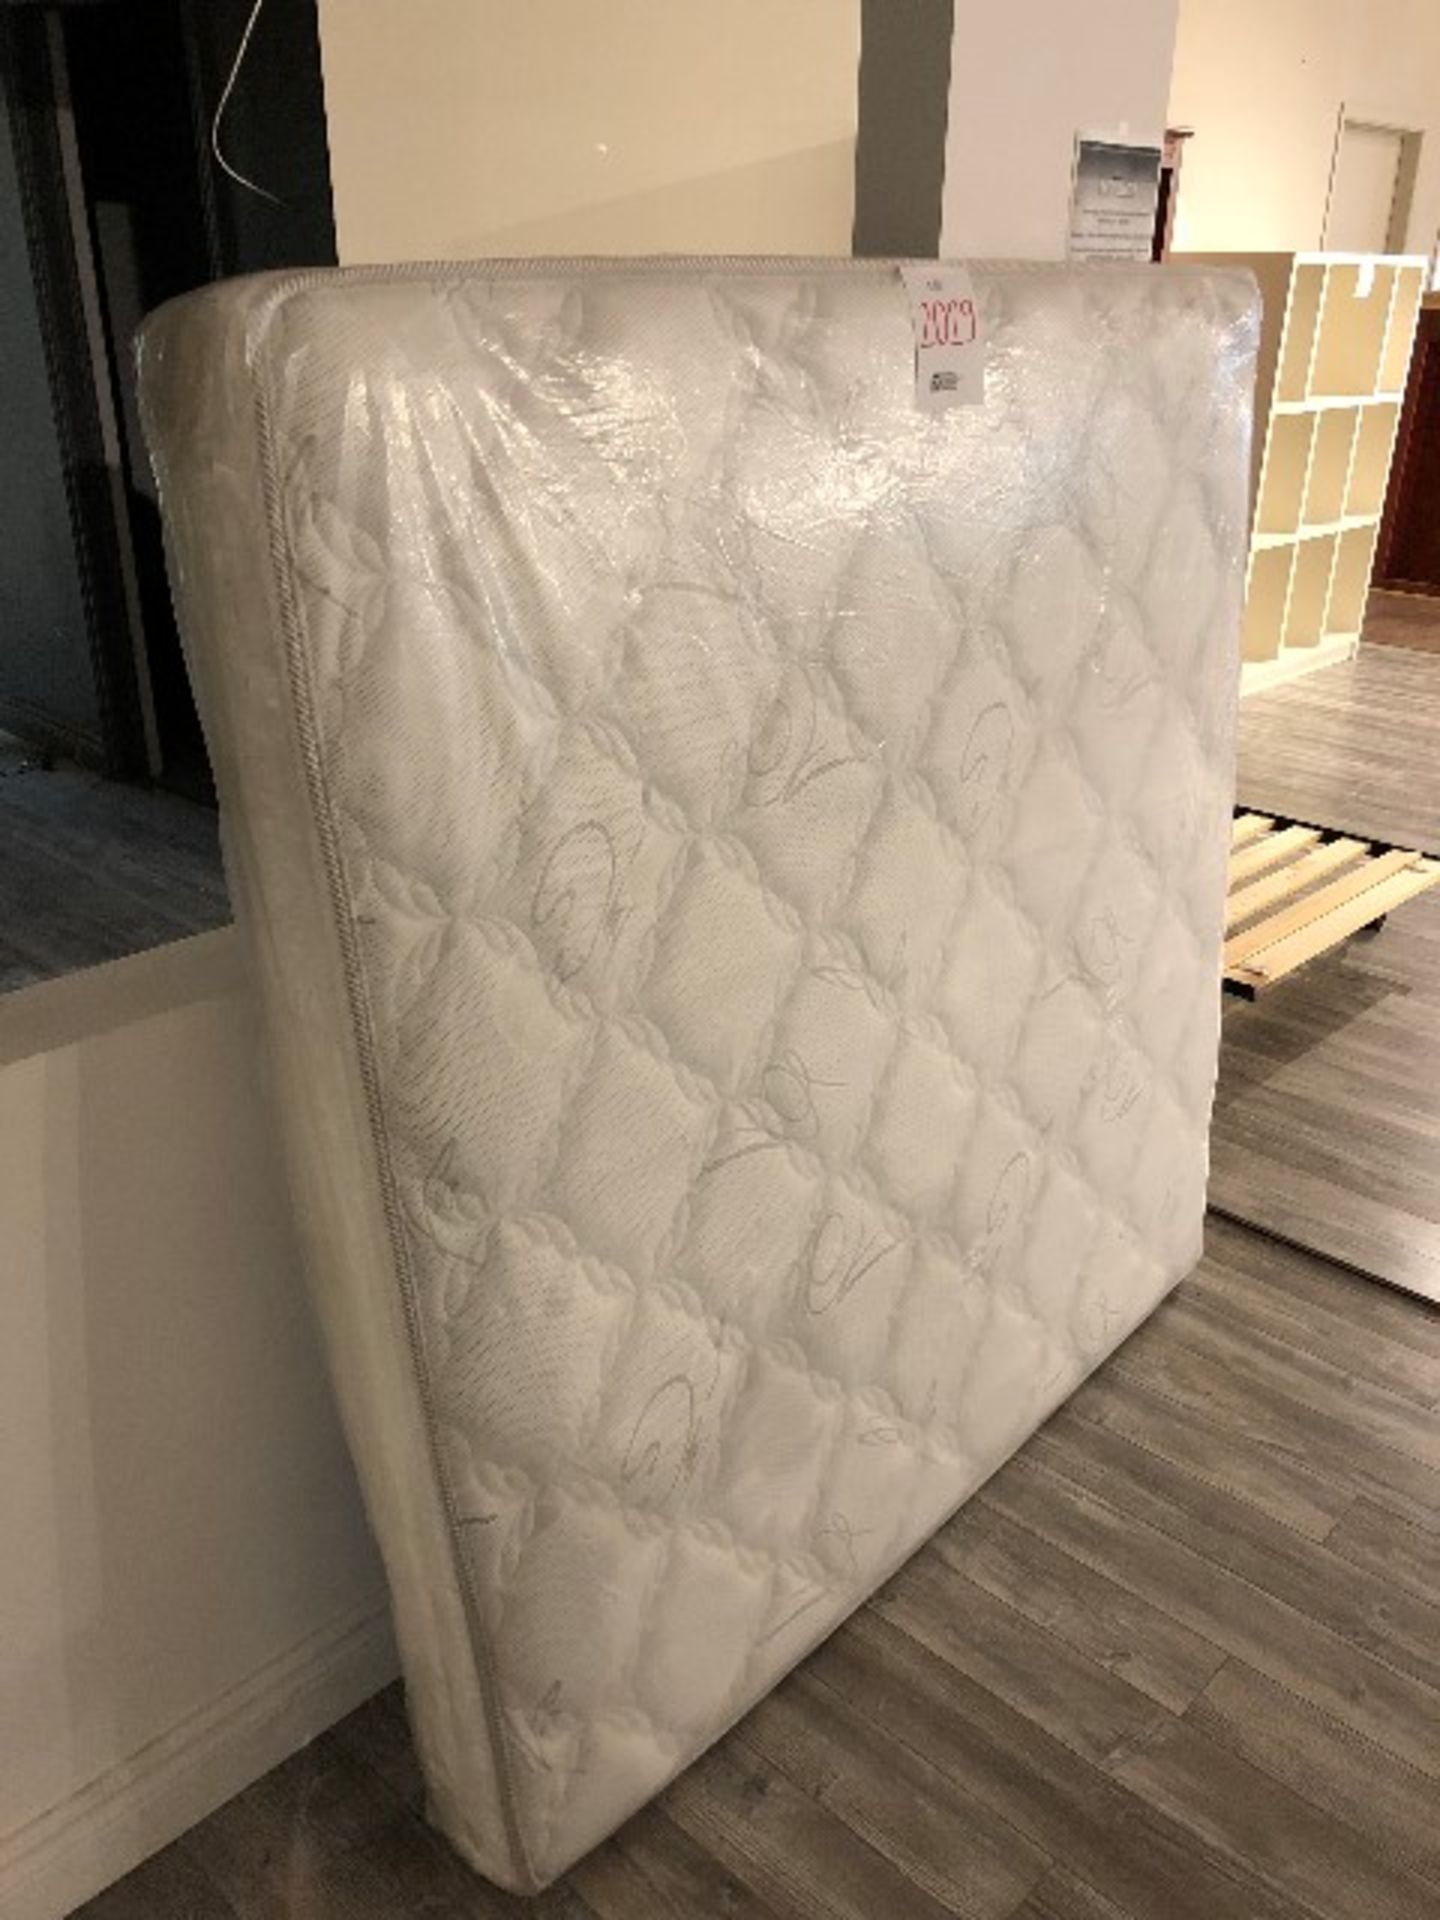 Mattress only, 58”x60” - Image 2 of 2